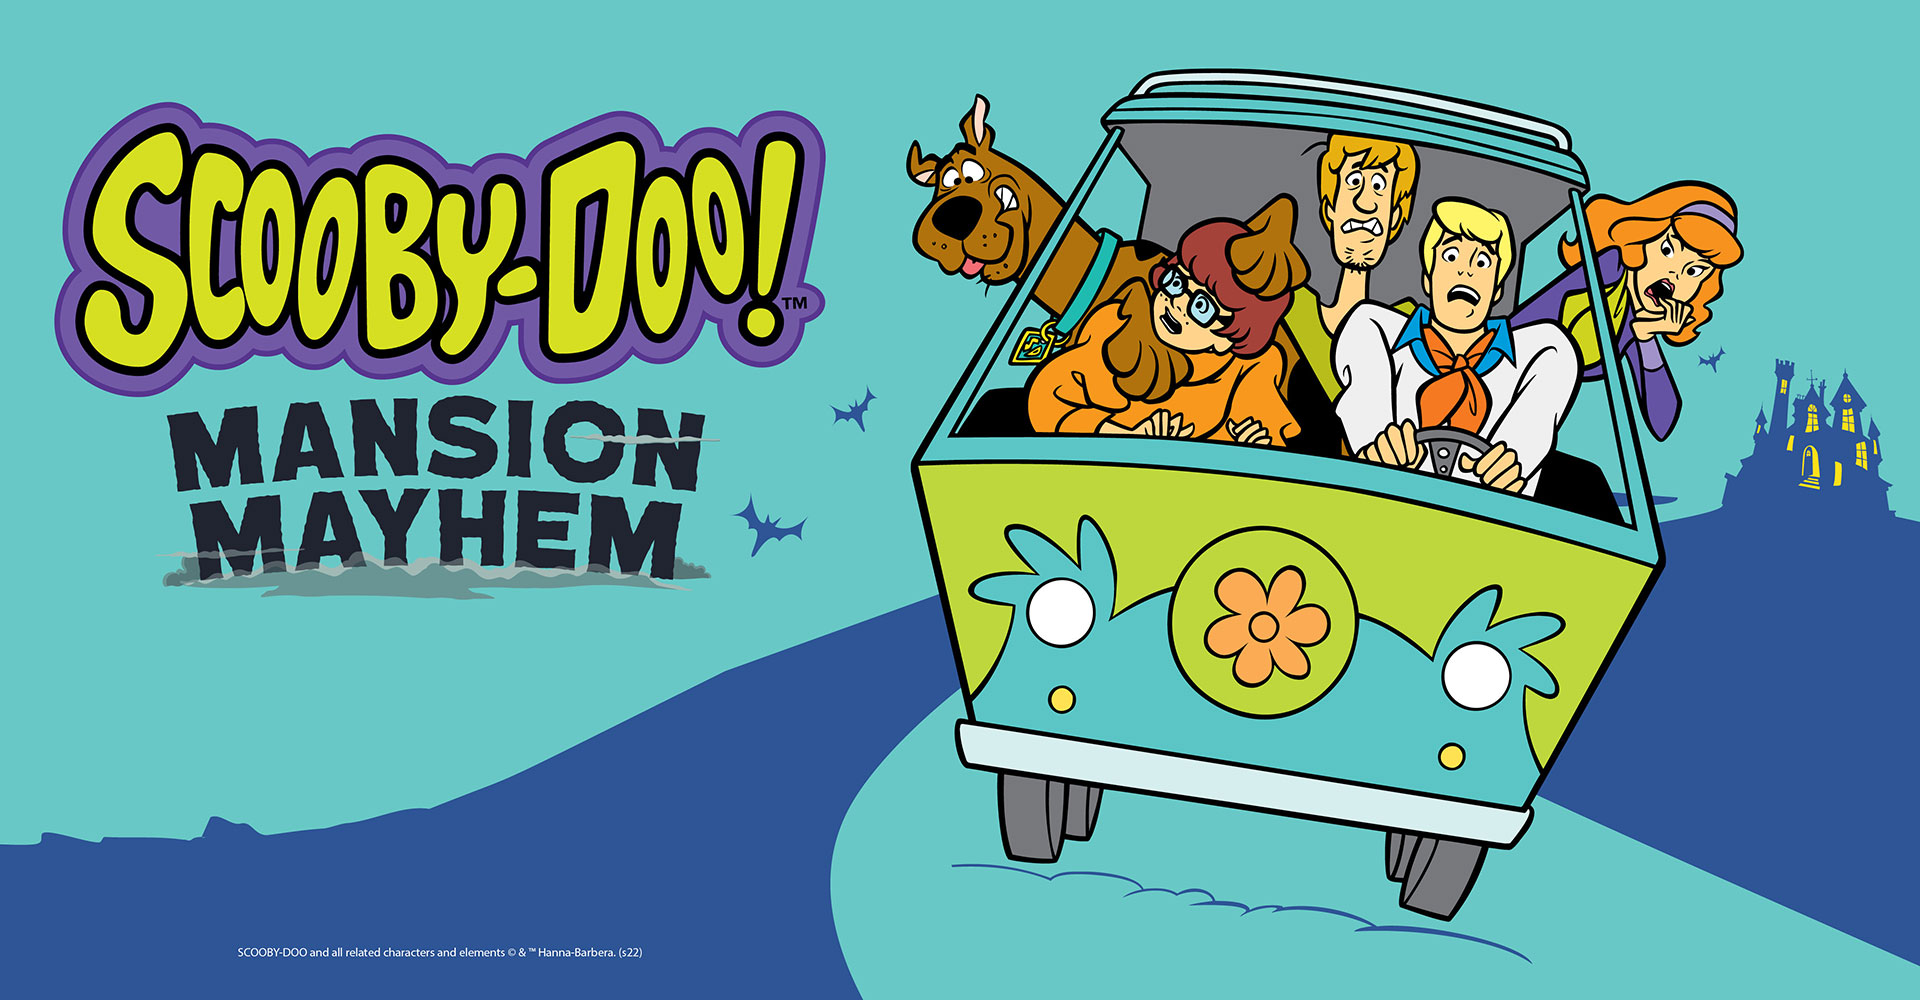 Logo for SCOOBY-DOO Mansion Mayhem exhibit. Scooby, Velma, Shaggy, Fred, and Daphne are sitting in The Mystery Machine with the silhouette of a mansion in the background.